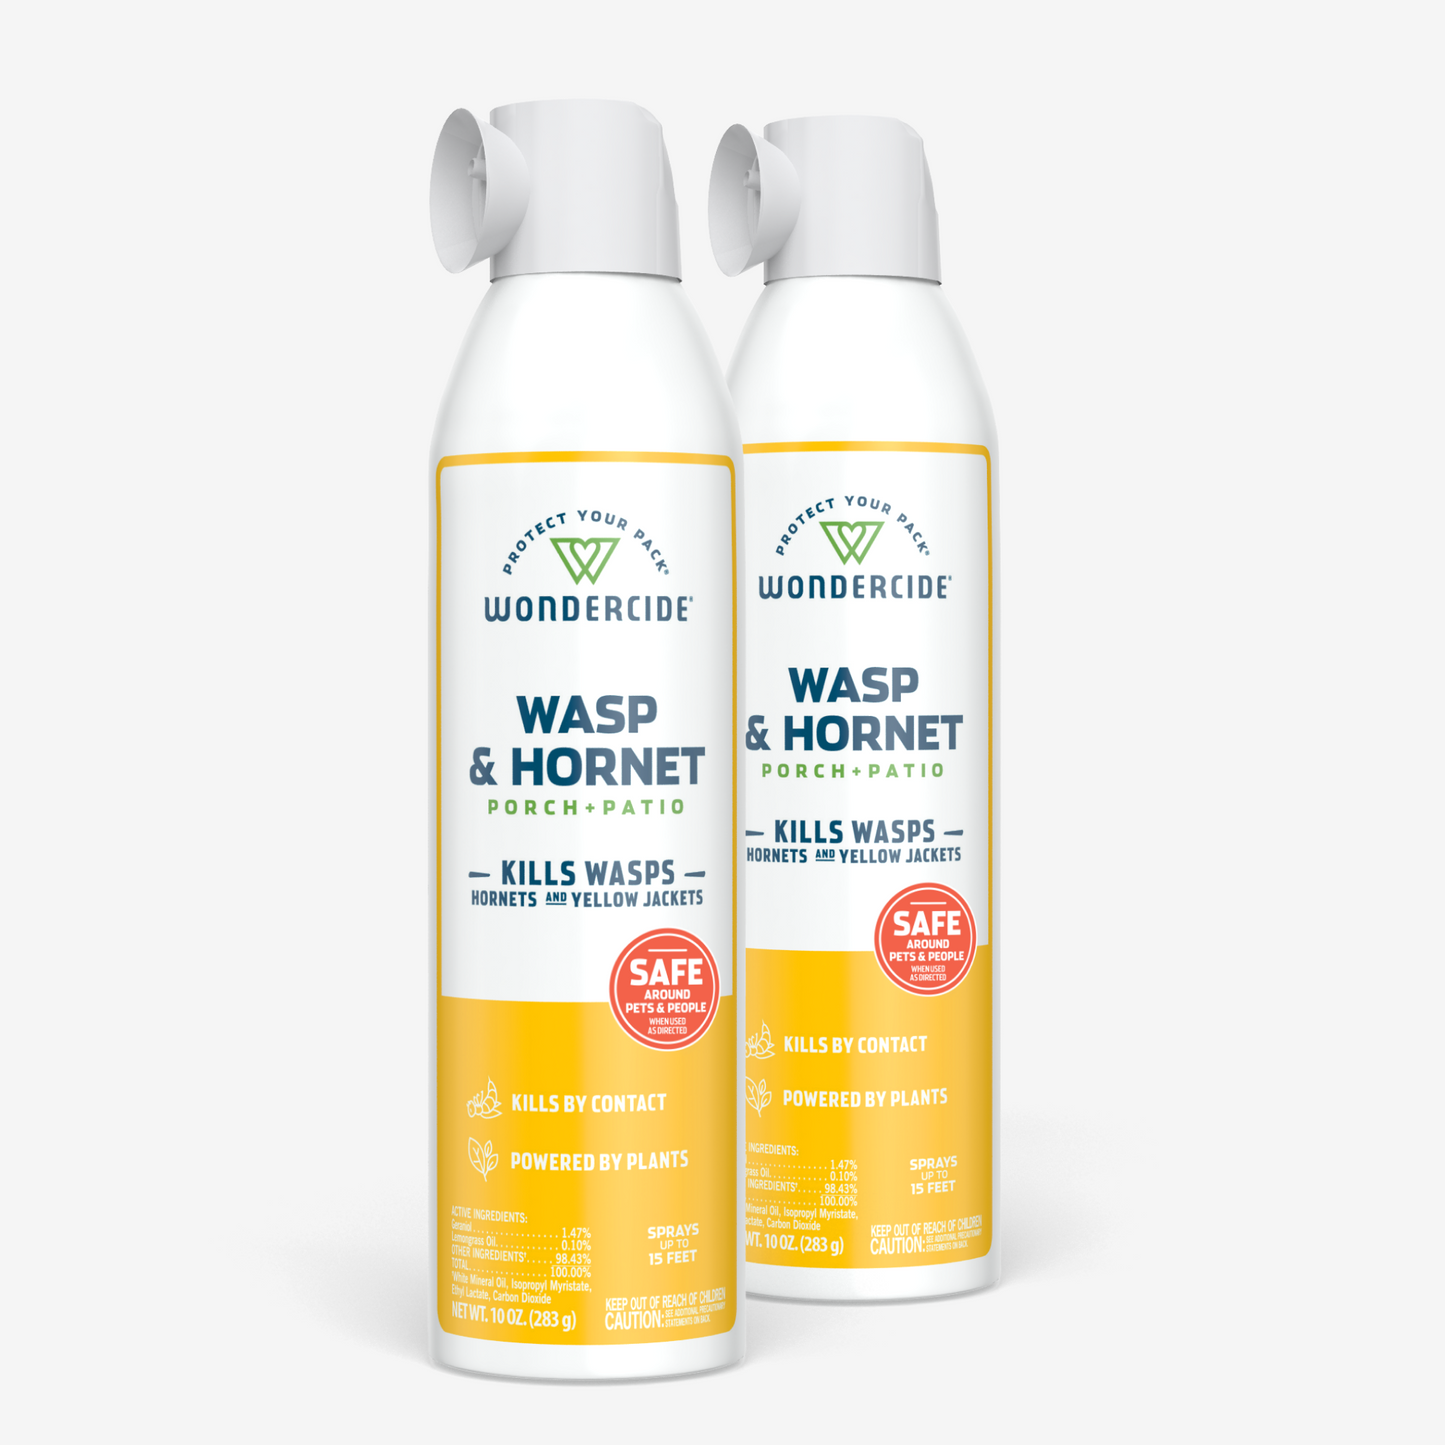 Wasp & Hornet for Porch + Patio with Natural Essential Oils